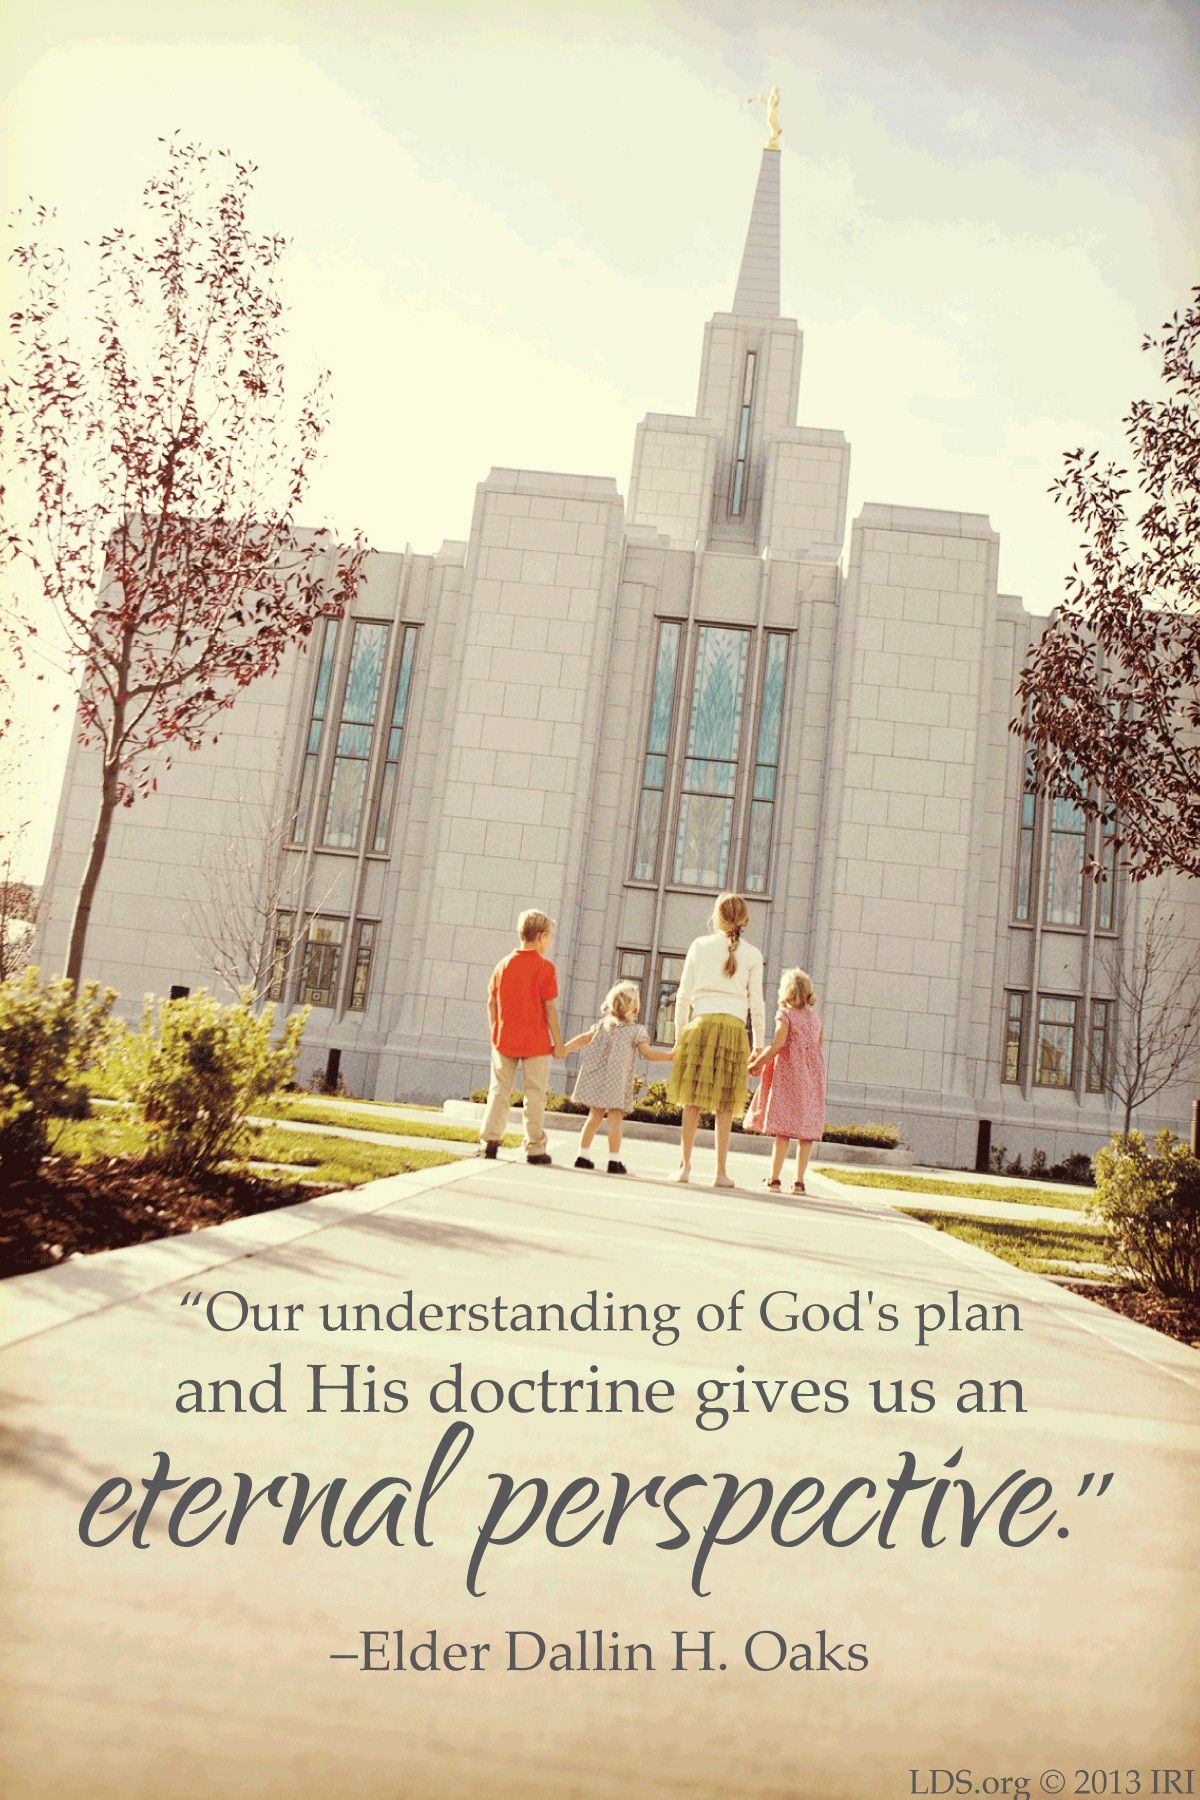 “Our understanding of God’s plan and His doctrine gives us an eternal perspective.”—Elder Dallin H. Oaks, “No Other Gods” © undefined ipCode 1.